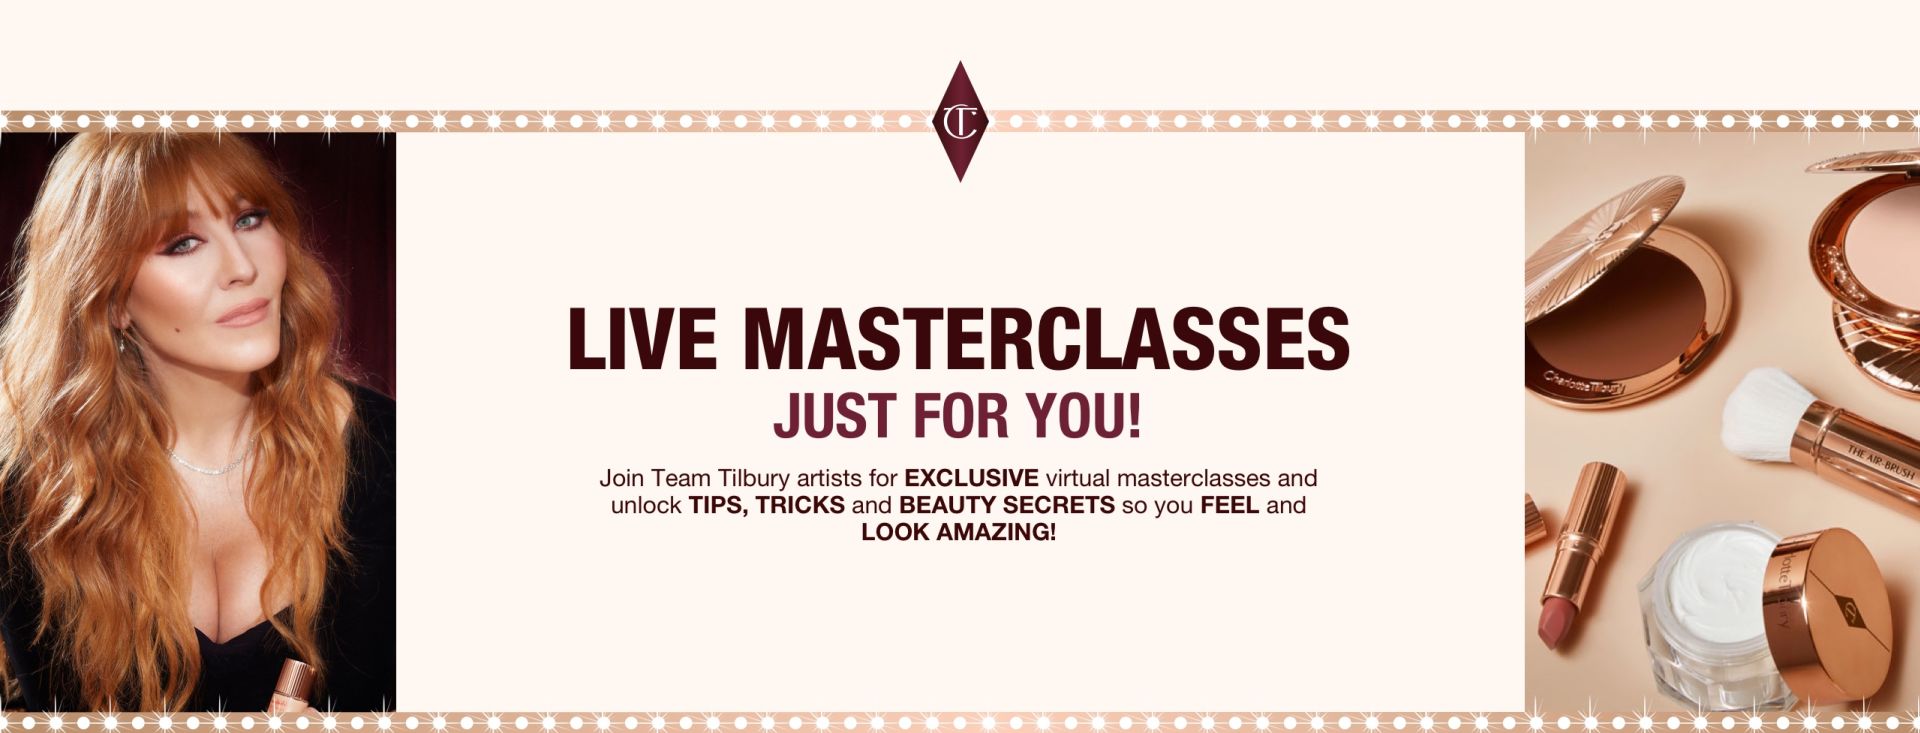 Join team Tilbury artists for exclusive virtual masterclasses and unlock tips and tricks! 